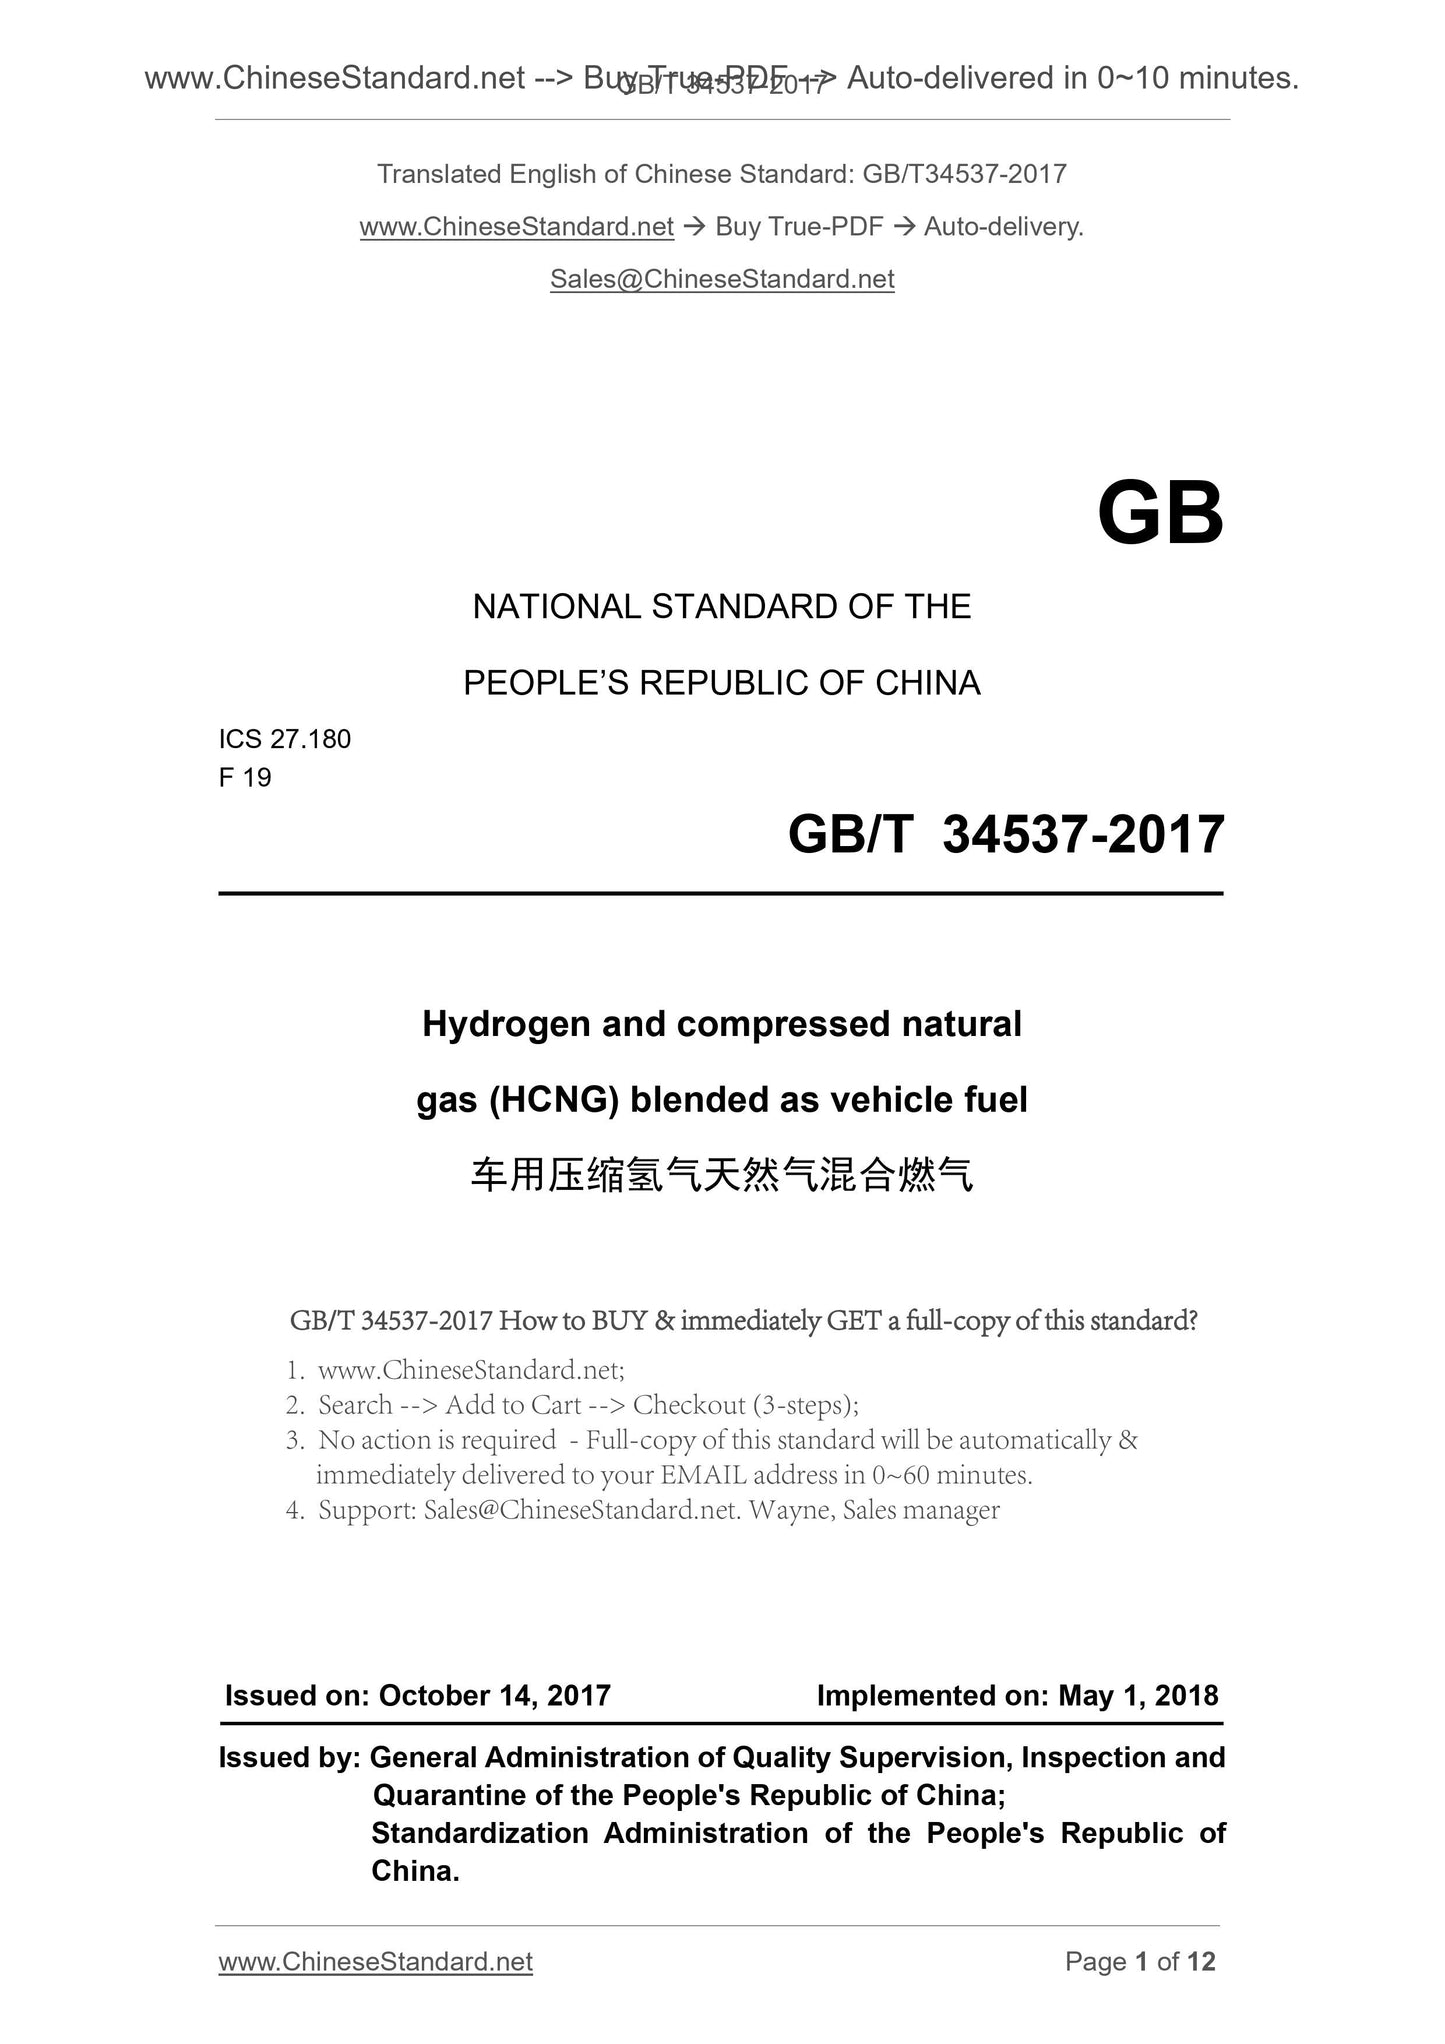 GB/T 34537-2017 Page 1